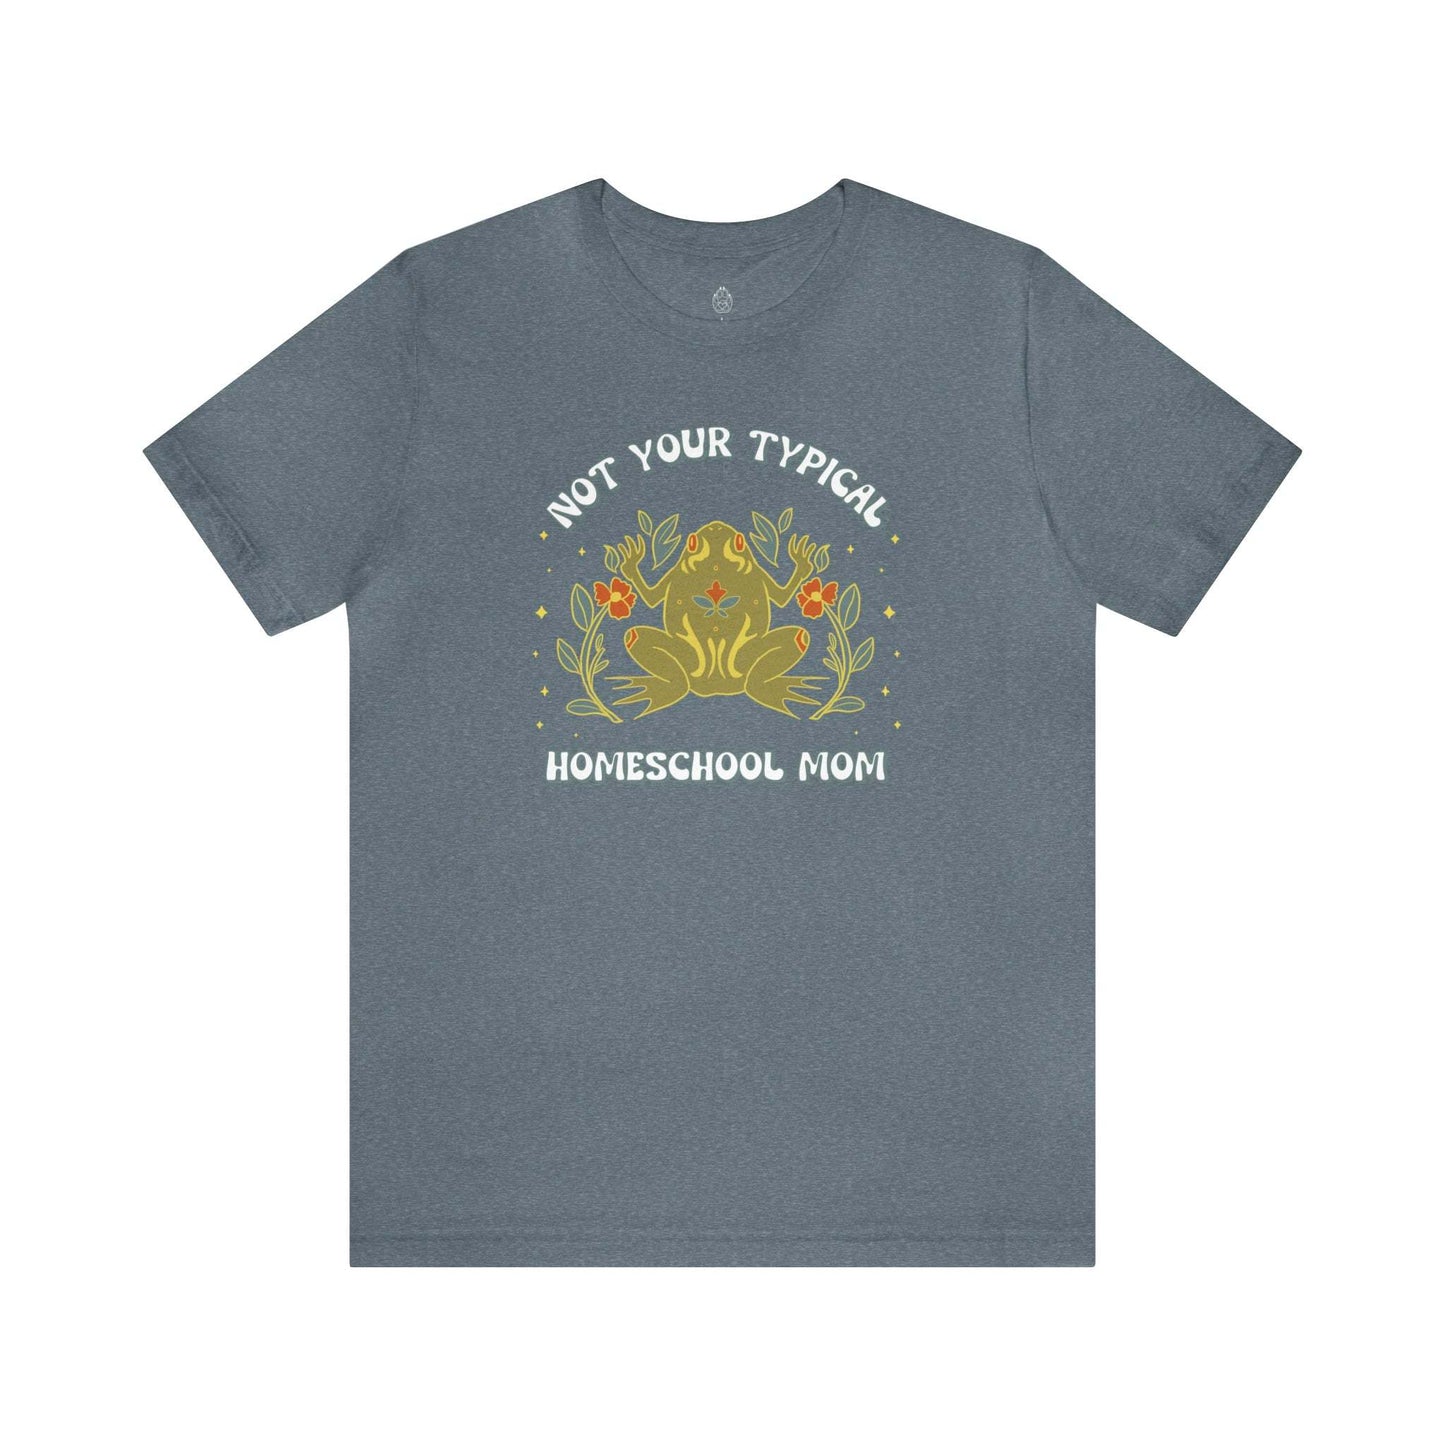 Typical Homeschool Mom Short Sleeve Tee ShirtWolfe Paw DesignsTypical Homeschool Mom Short Sleeve Tee ShirtHow boring it would be if we were all the same.
Match your little!
Check out our kids tee: Not Your Typical Homeschooler 
100% Airlume combed and ringspun cotton (fiNot Your Typical Homeschool Mom Short Sleeve Tee Shirt